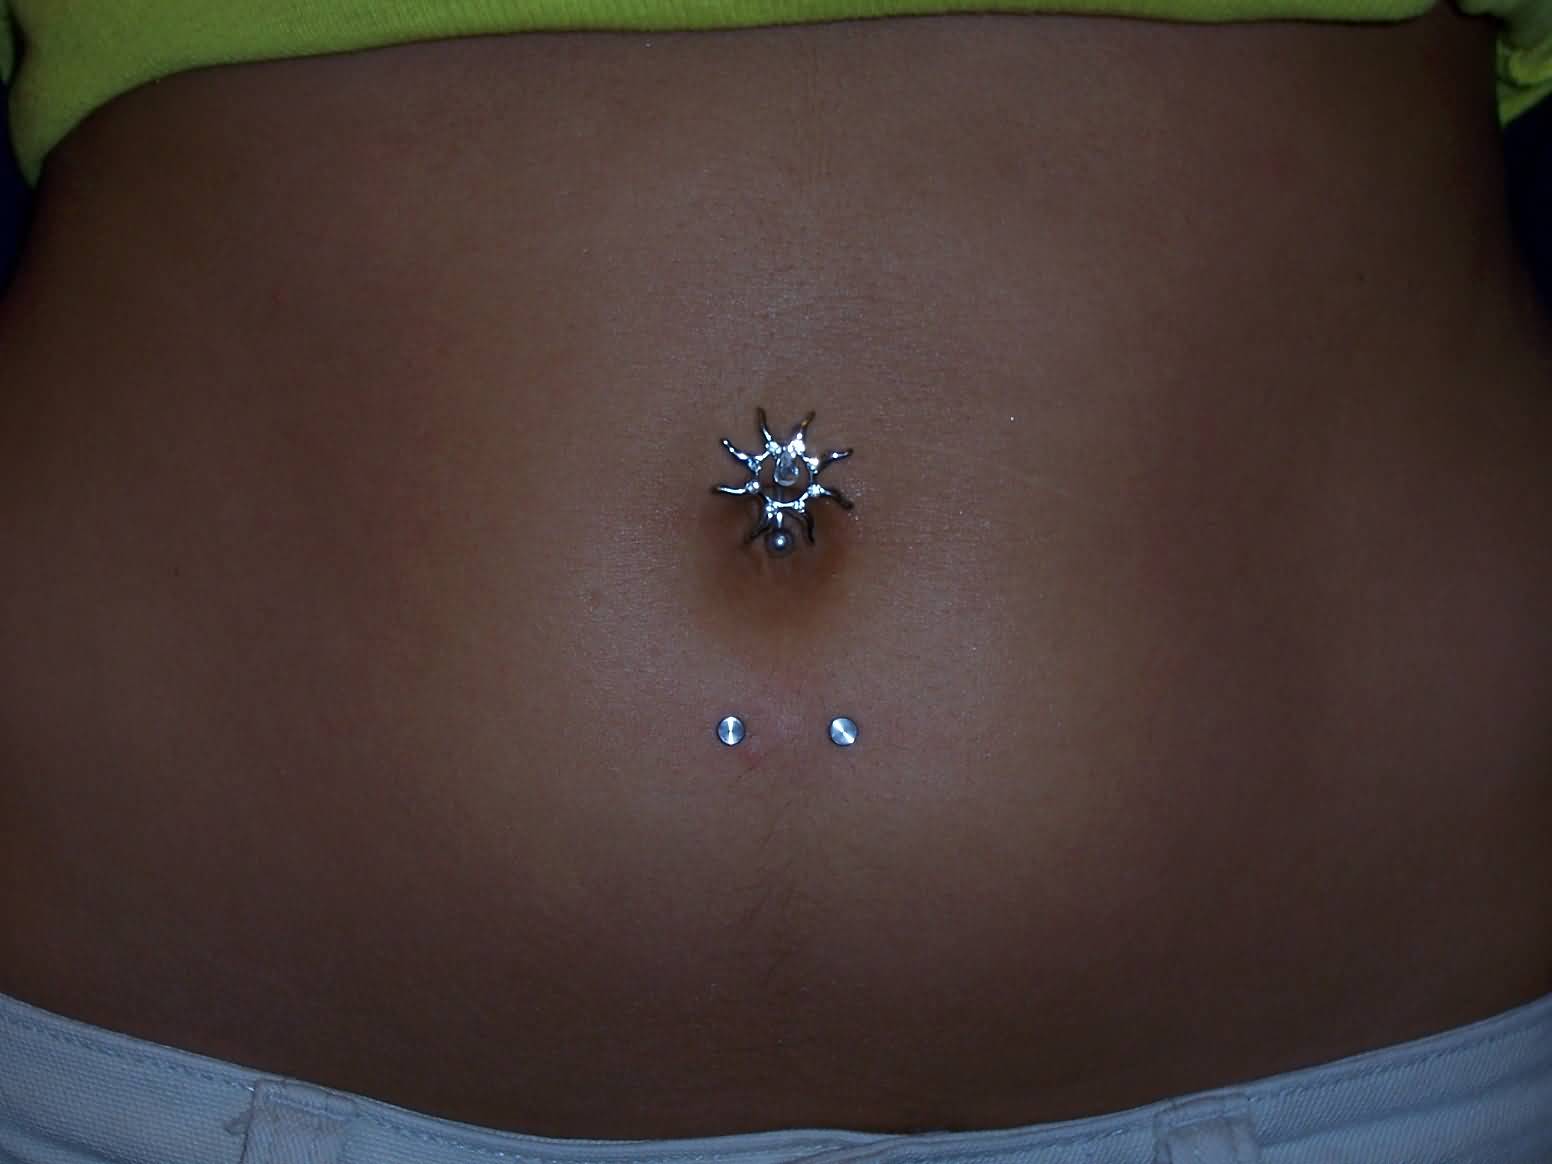 Beautiful Belly Piercing With Sun Stud And Surface Navel Piercing With Dermal Anchors